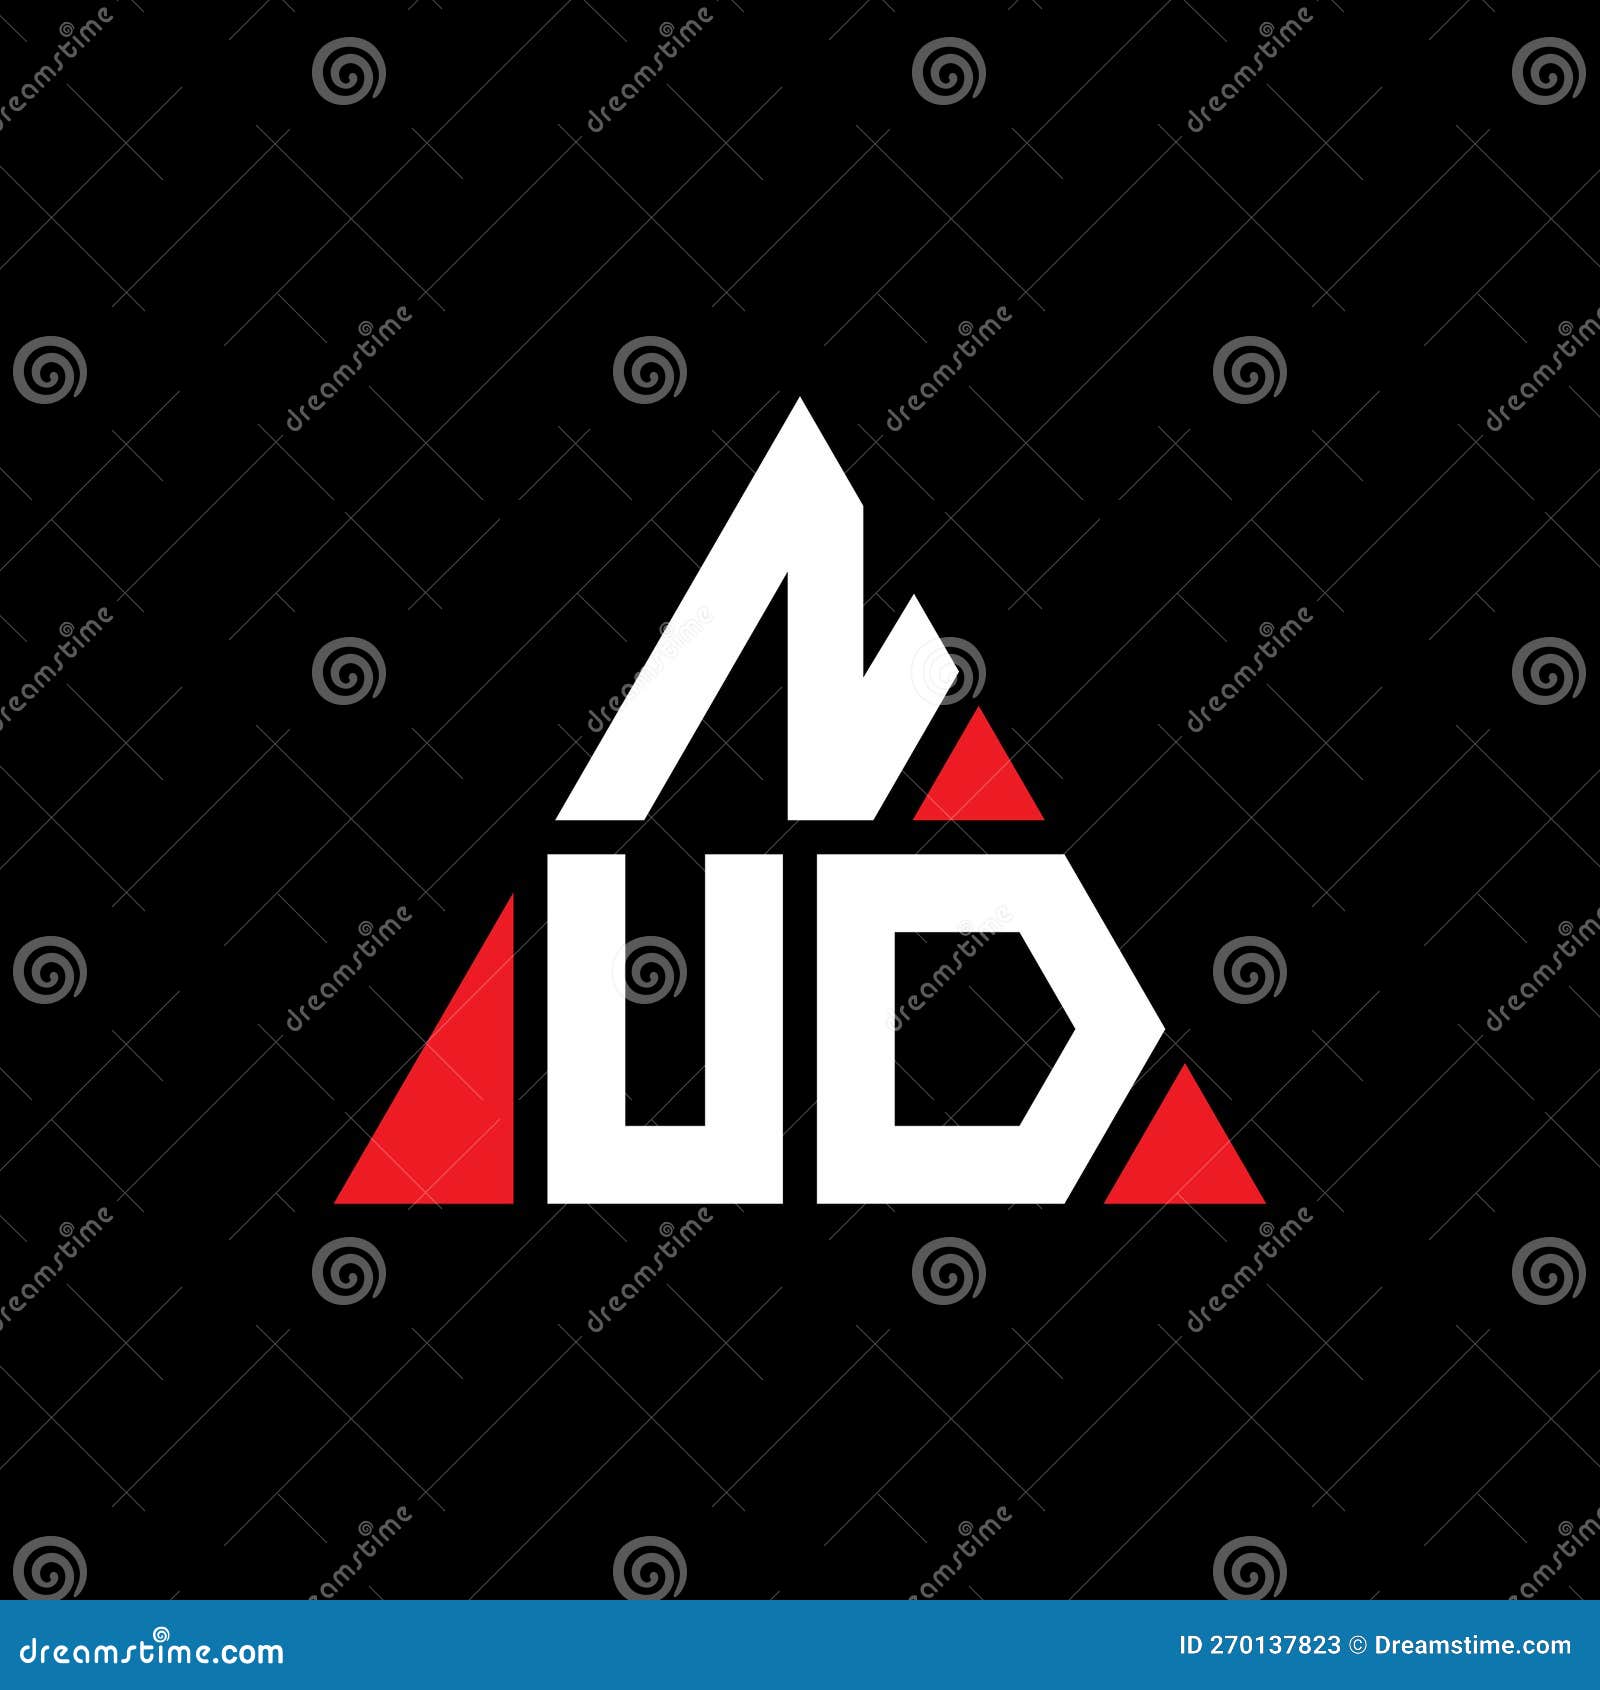 nud triangle letter logo  with triangle . nud triangle logo  monogram. nud triangle  logo template with red